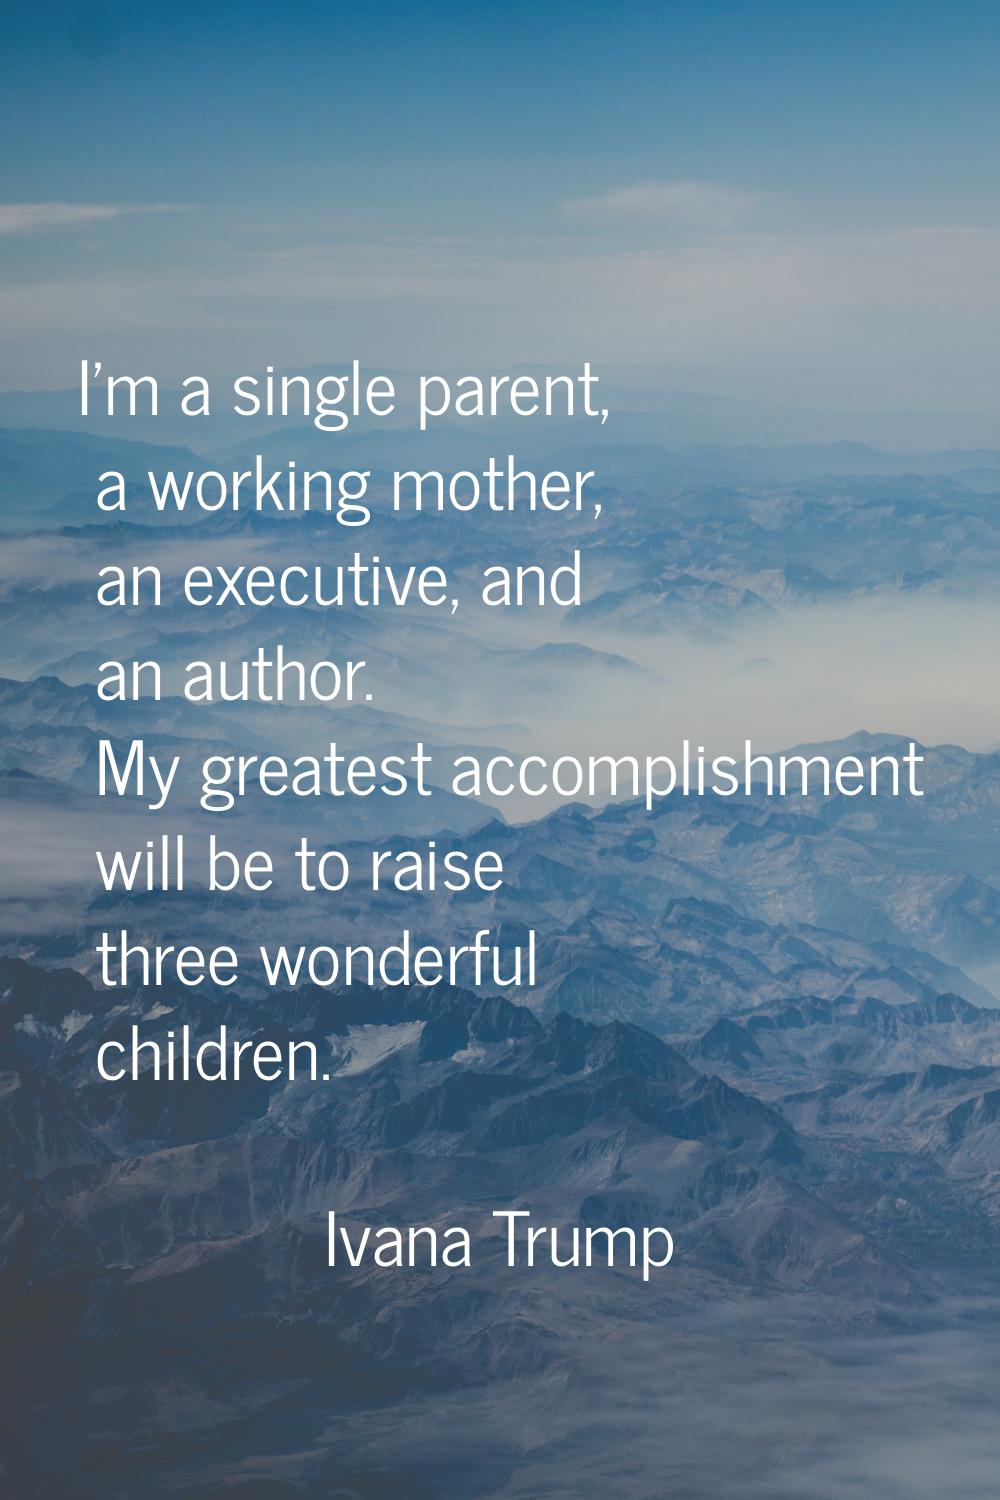 I'm a single parent, a working mother, an executive, and an author. My greatest accomplishment will